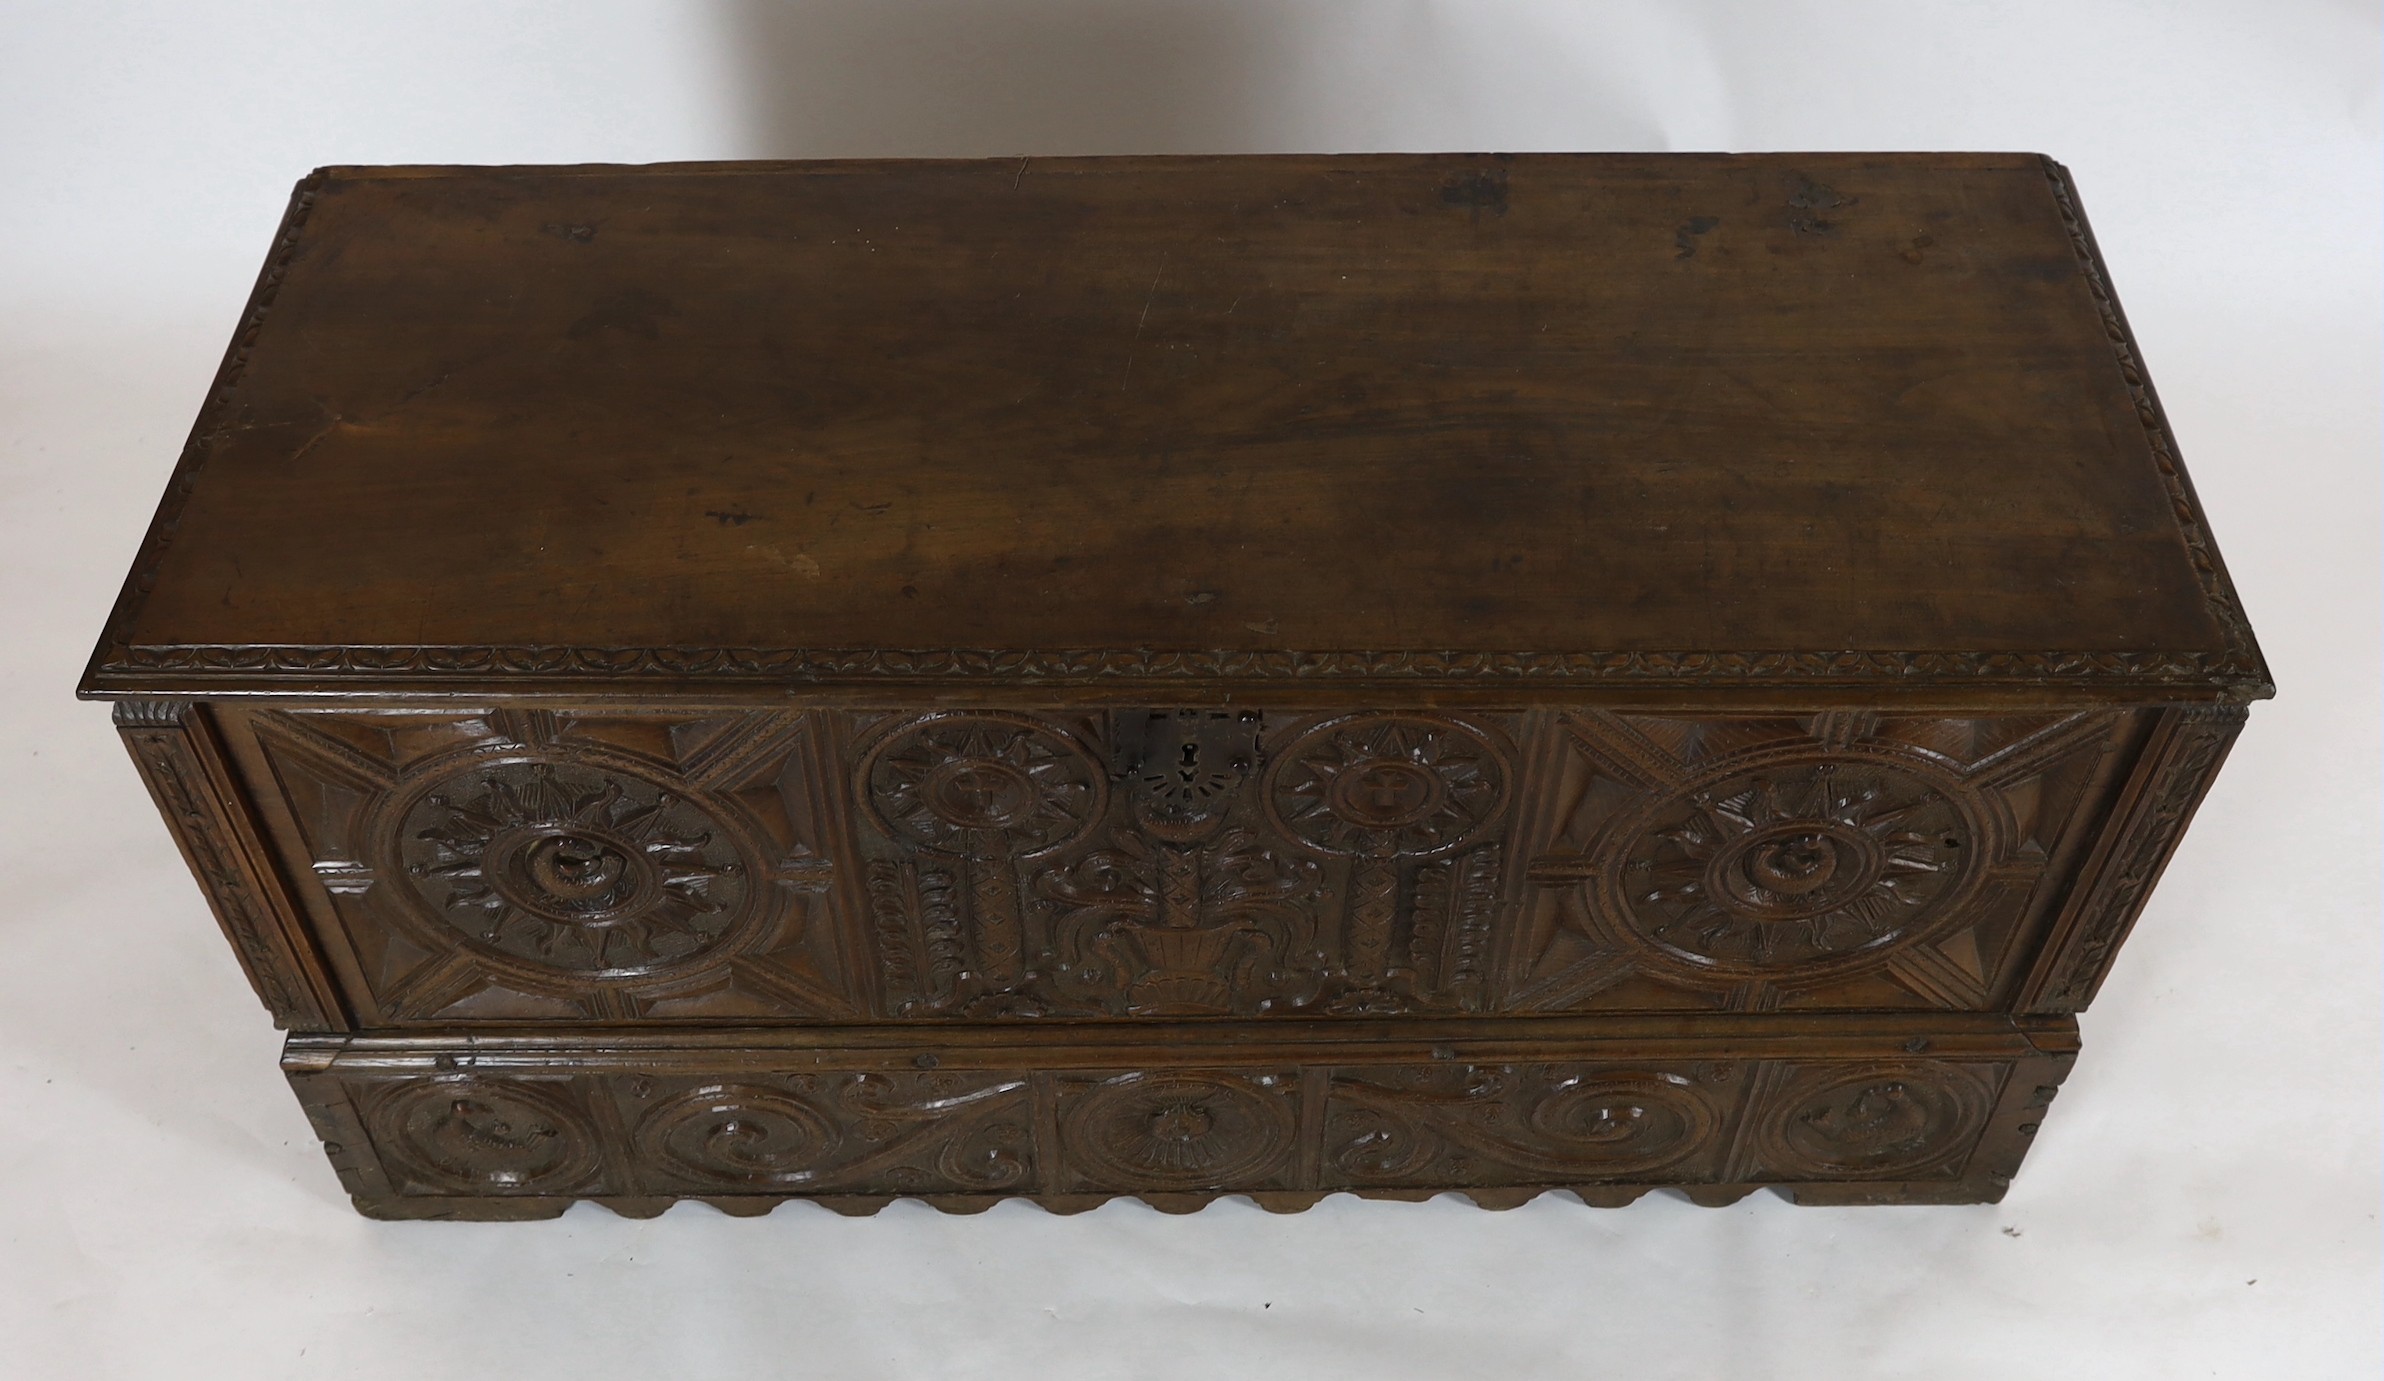 An 18th century Spanish chestnut coffer, carved in relief with a central fountain flanked by - Image 3 of 4